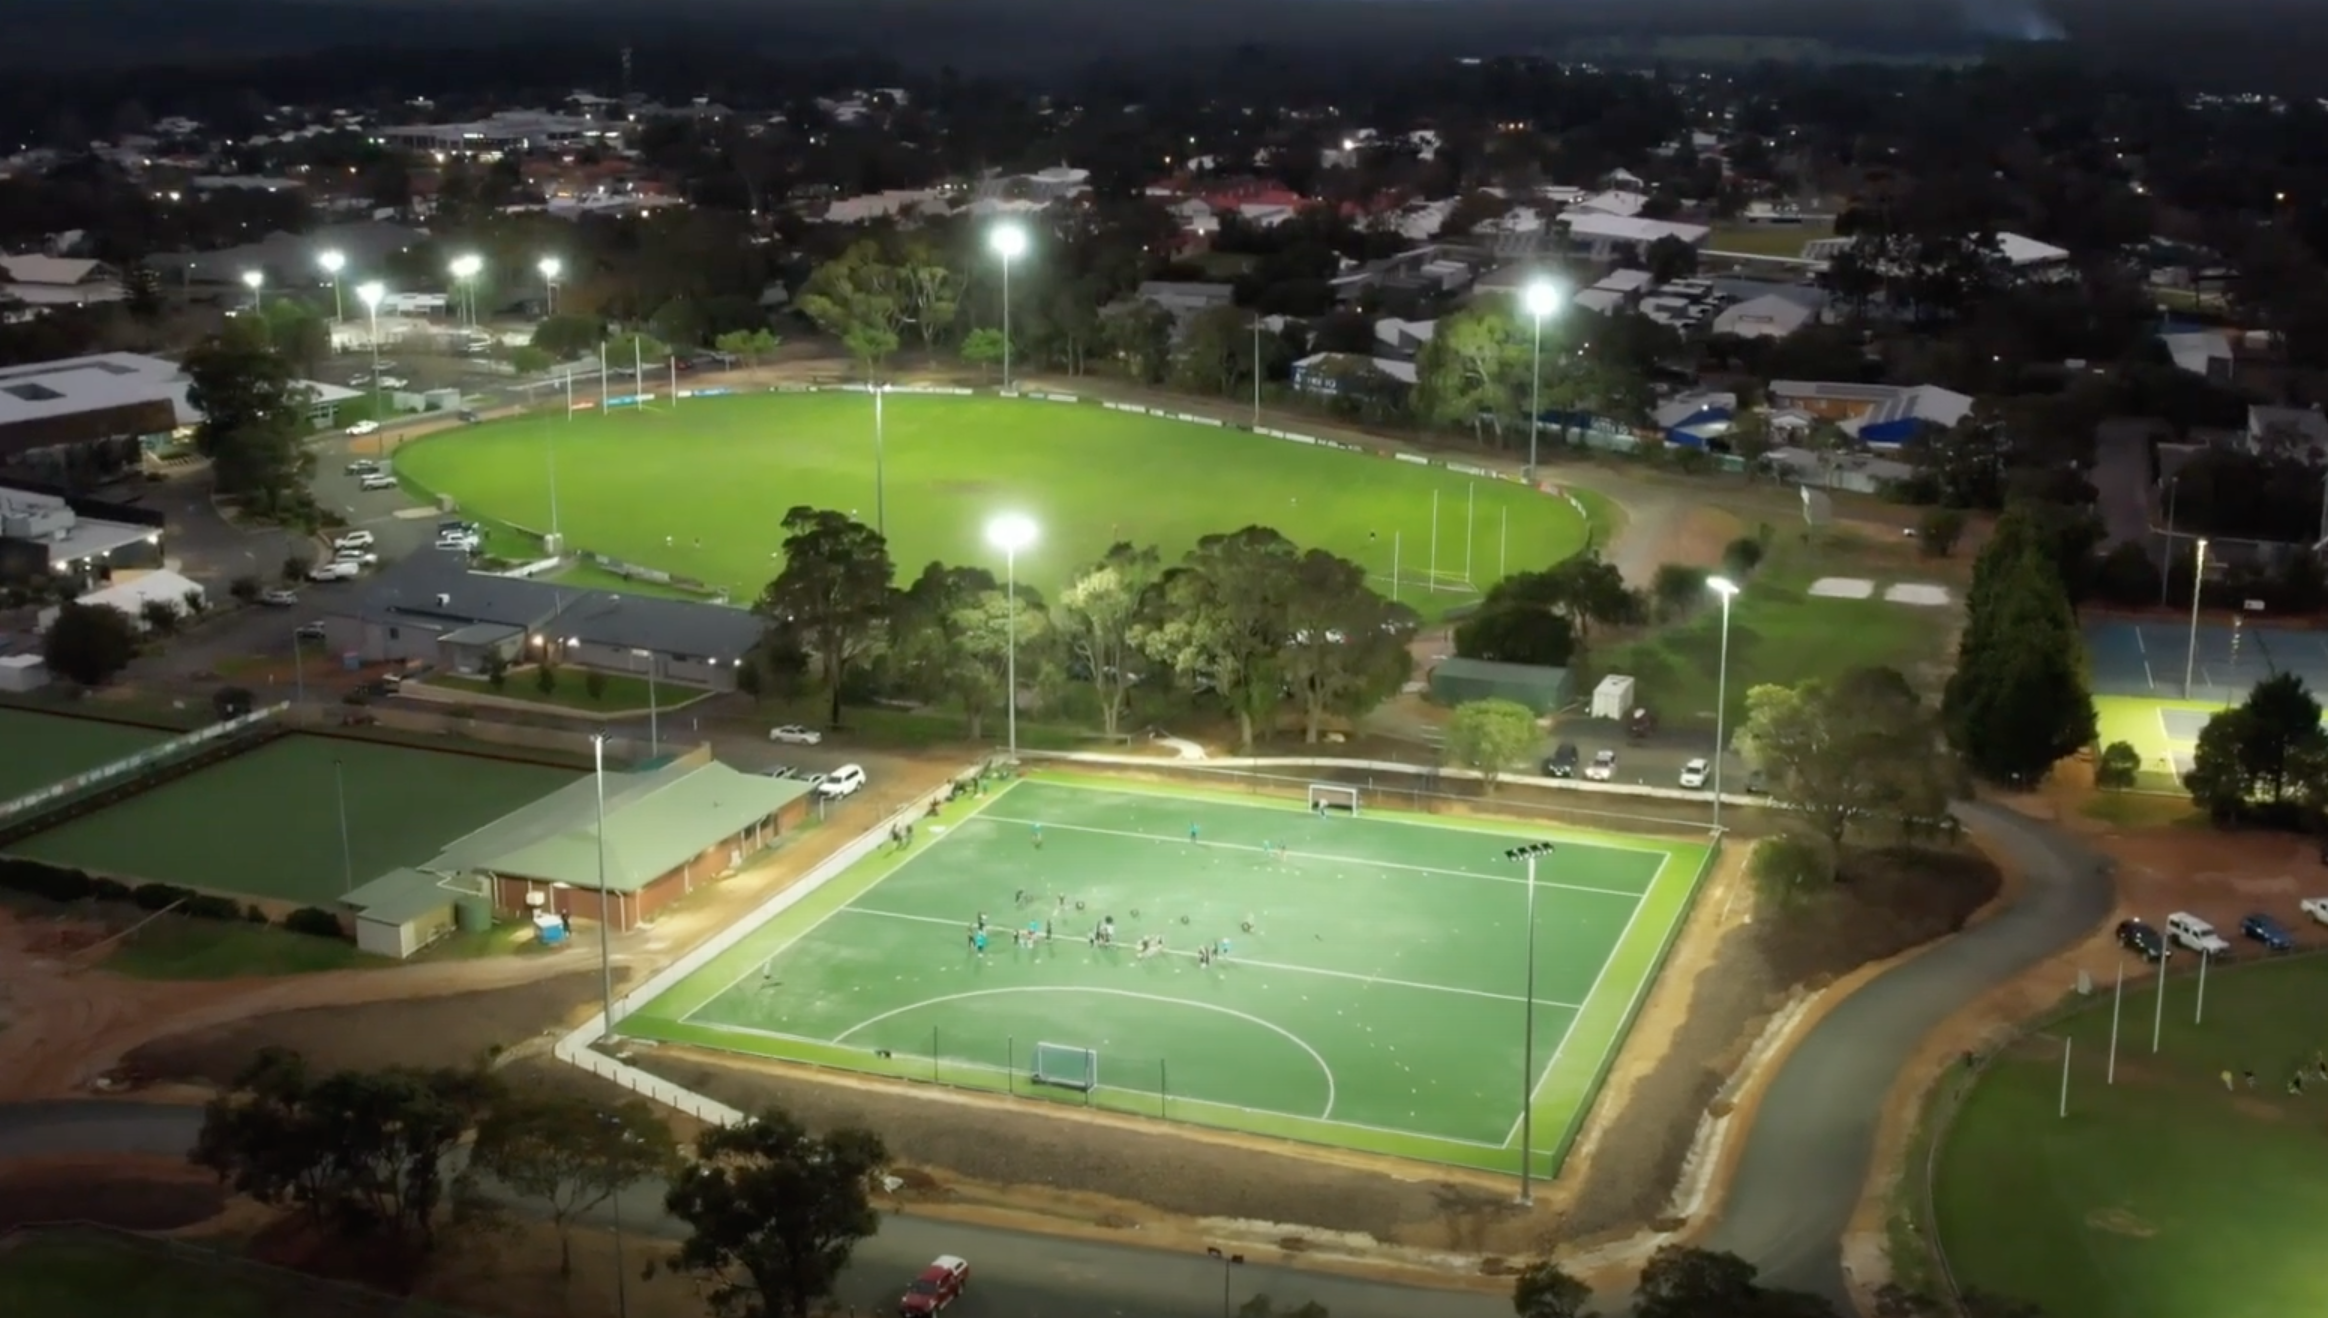 Hockey turf - gloucester park - drone shot.png